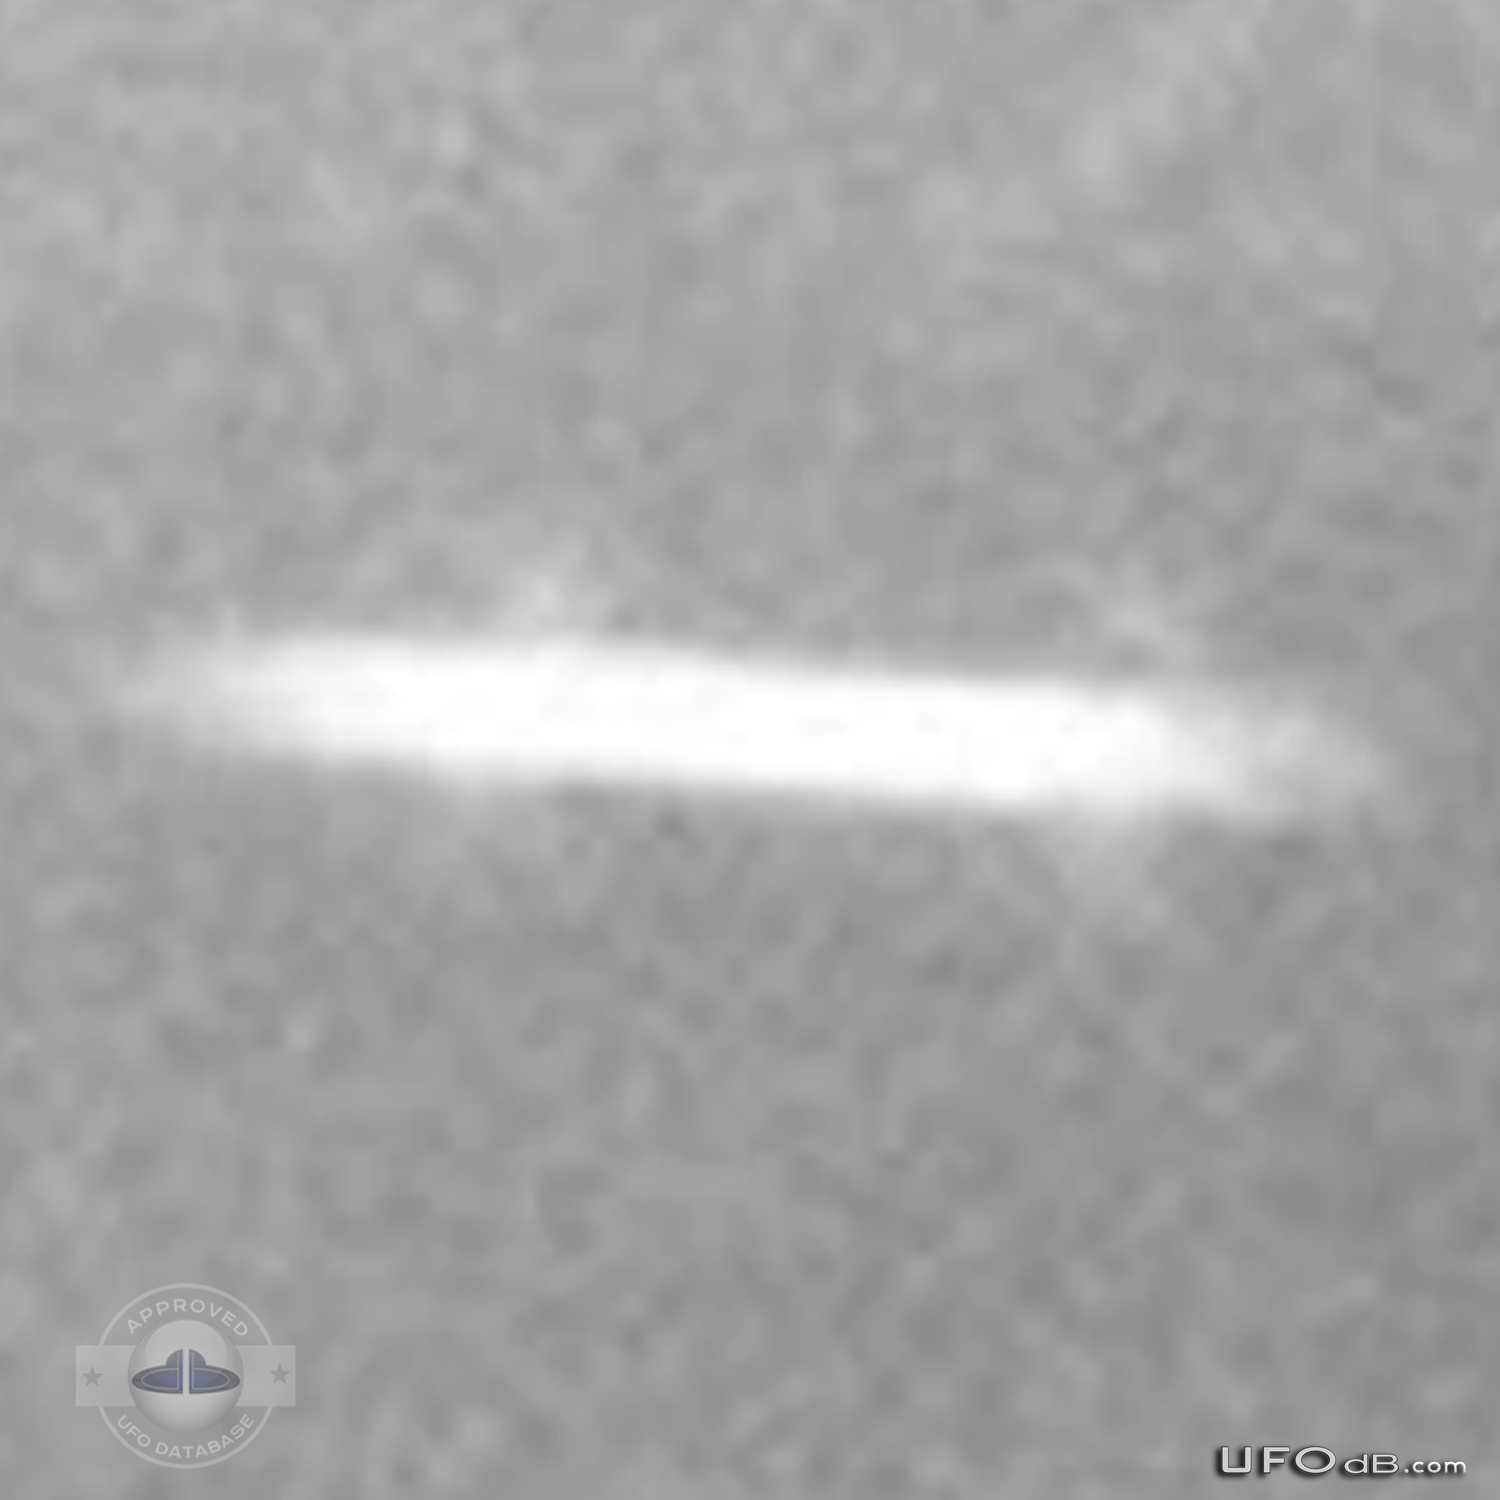 Dark Winged Saucer UFO over the town of Havant, England | April 7 2011 UFO Picture #263-6